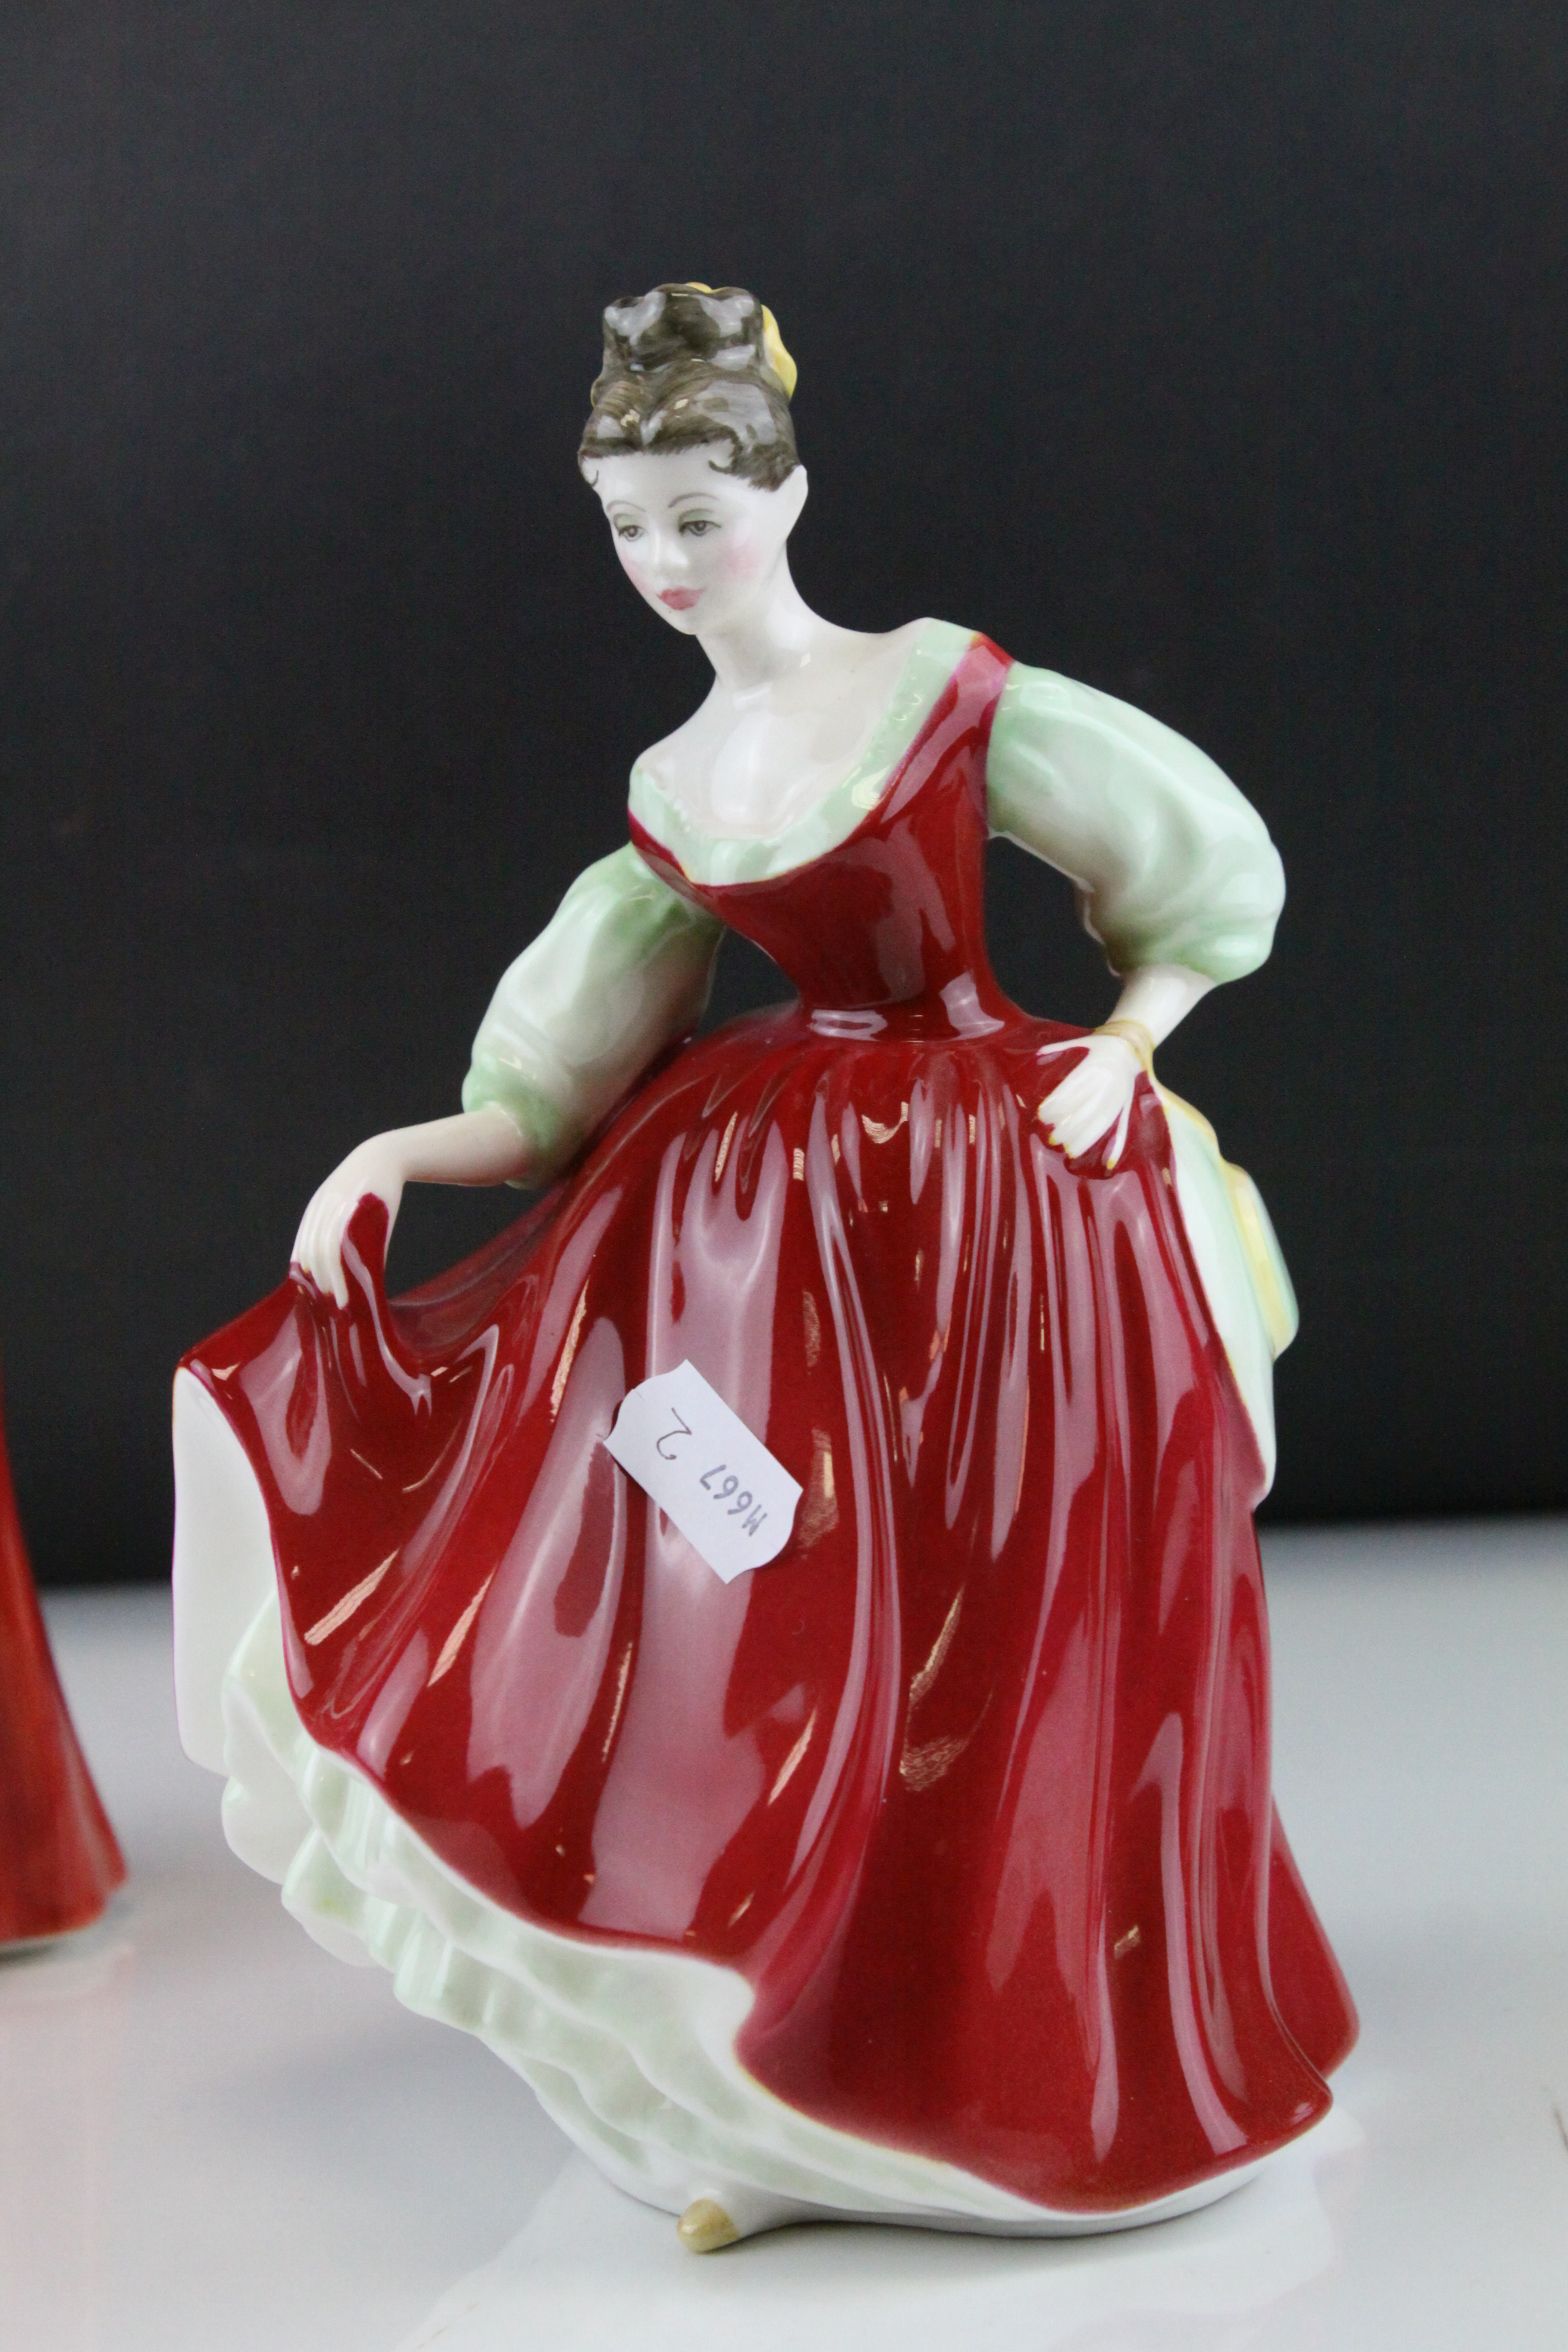 Three Royal Doulton Figurines - Buttercup, Fair Lady and Lady Worsley ( limited edition no. 512 ) - Image 5 of 10